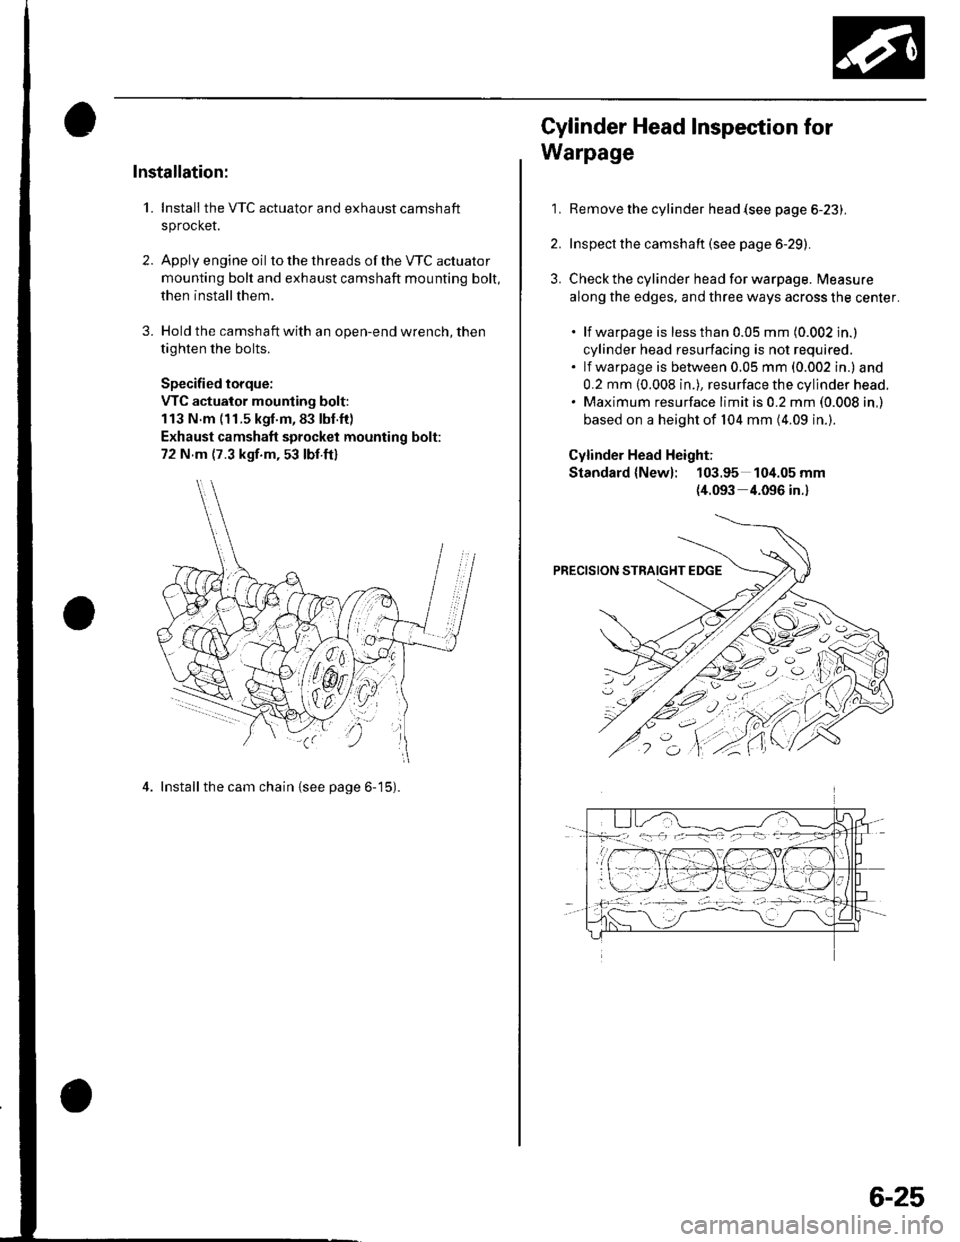 HONDA CIVIC 2003 7.G Workshop Manual Installation:
1. Install the VTC actuator and exhaust camshaft
sprocket.
2. Apply engine oil to the th reads of the VTC actuato r
mounting bolt and exhaust camshaft mounting bolt,
then install them.
3